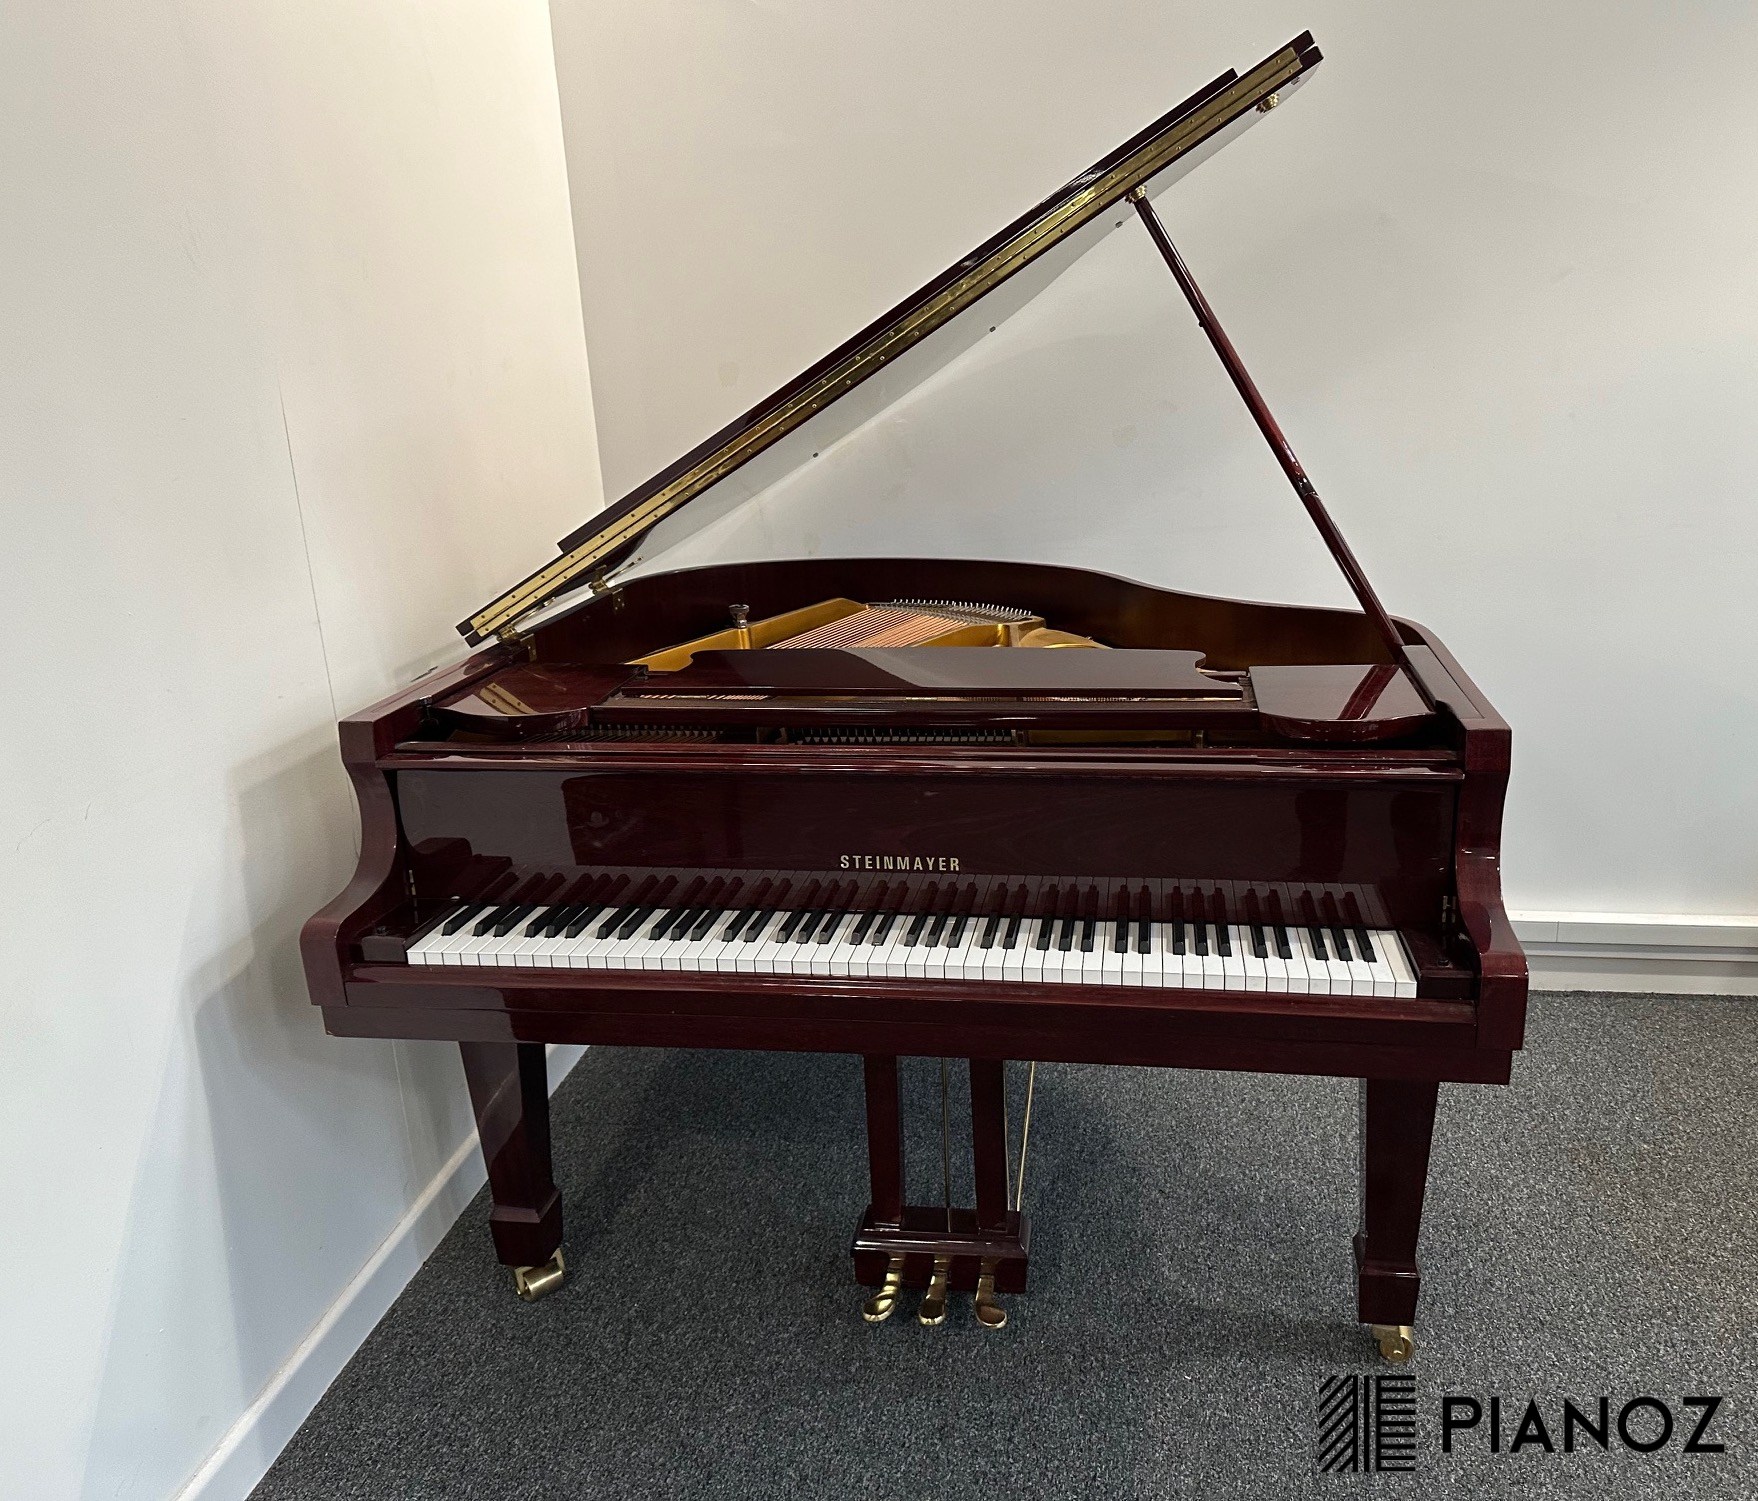 Steinmayer 148 High Gloss Baby Grand Piano piano for sale in UK